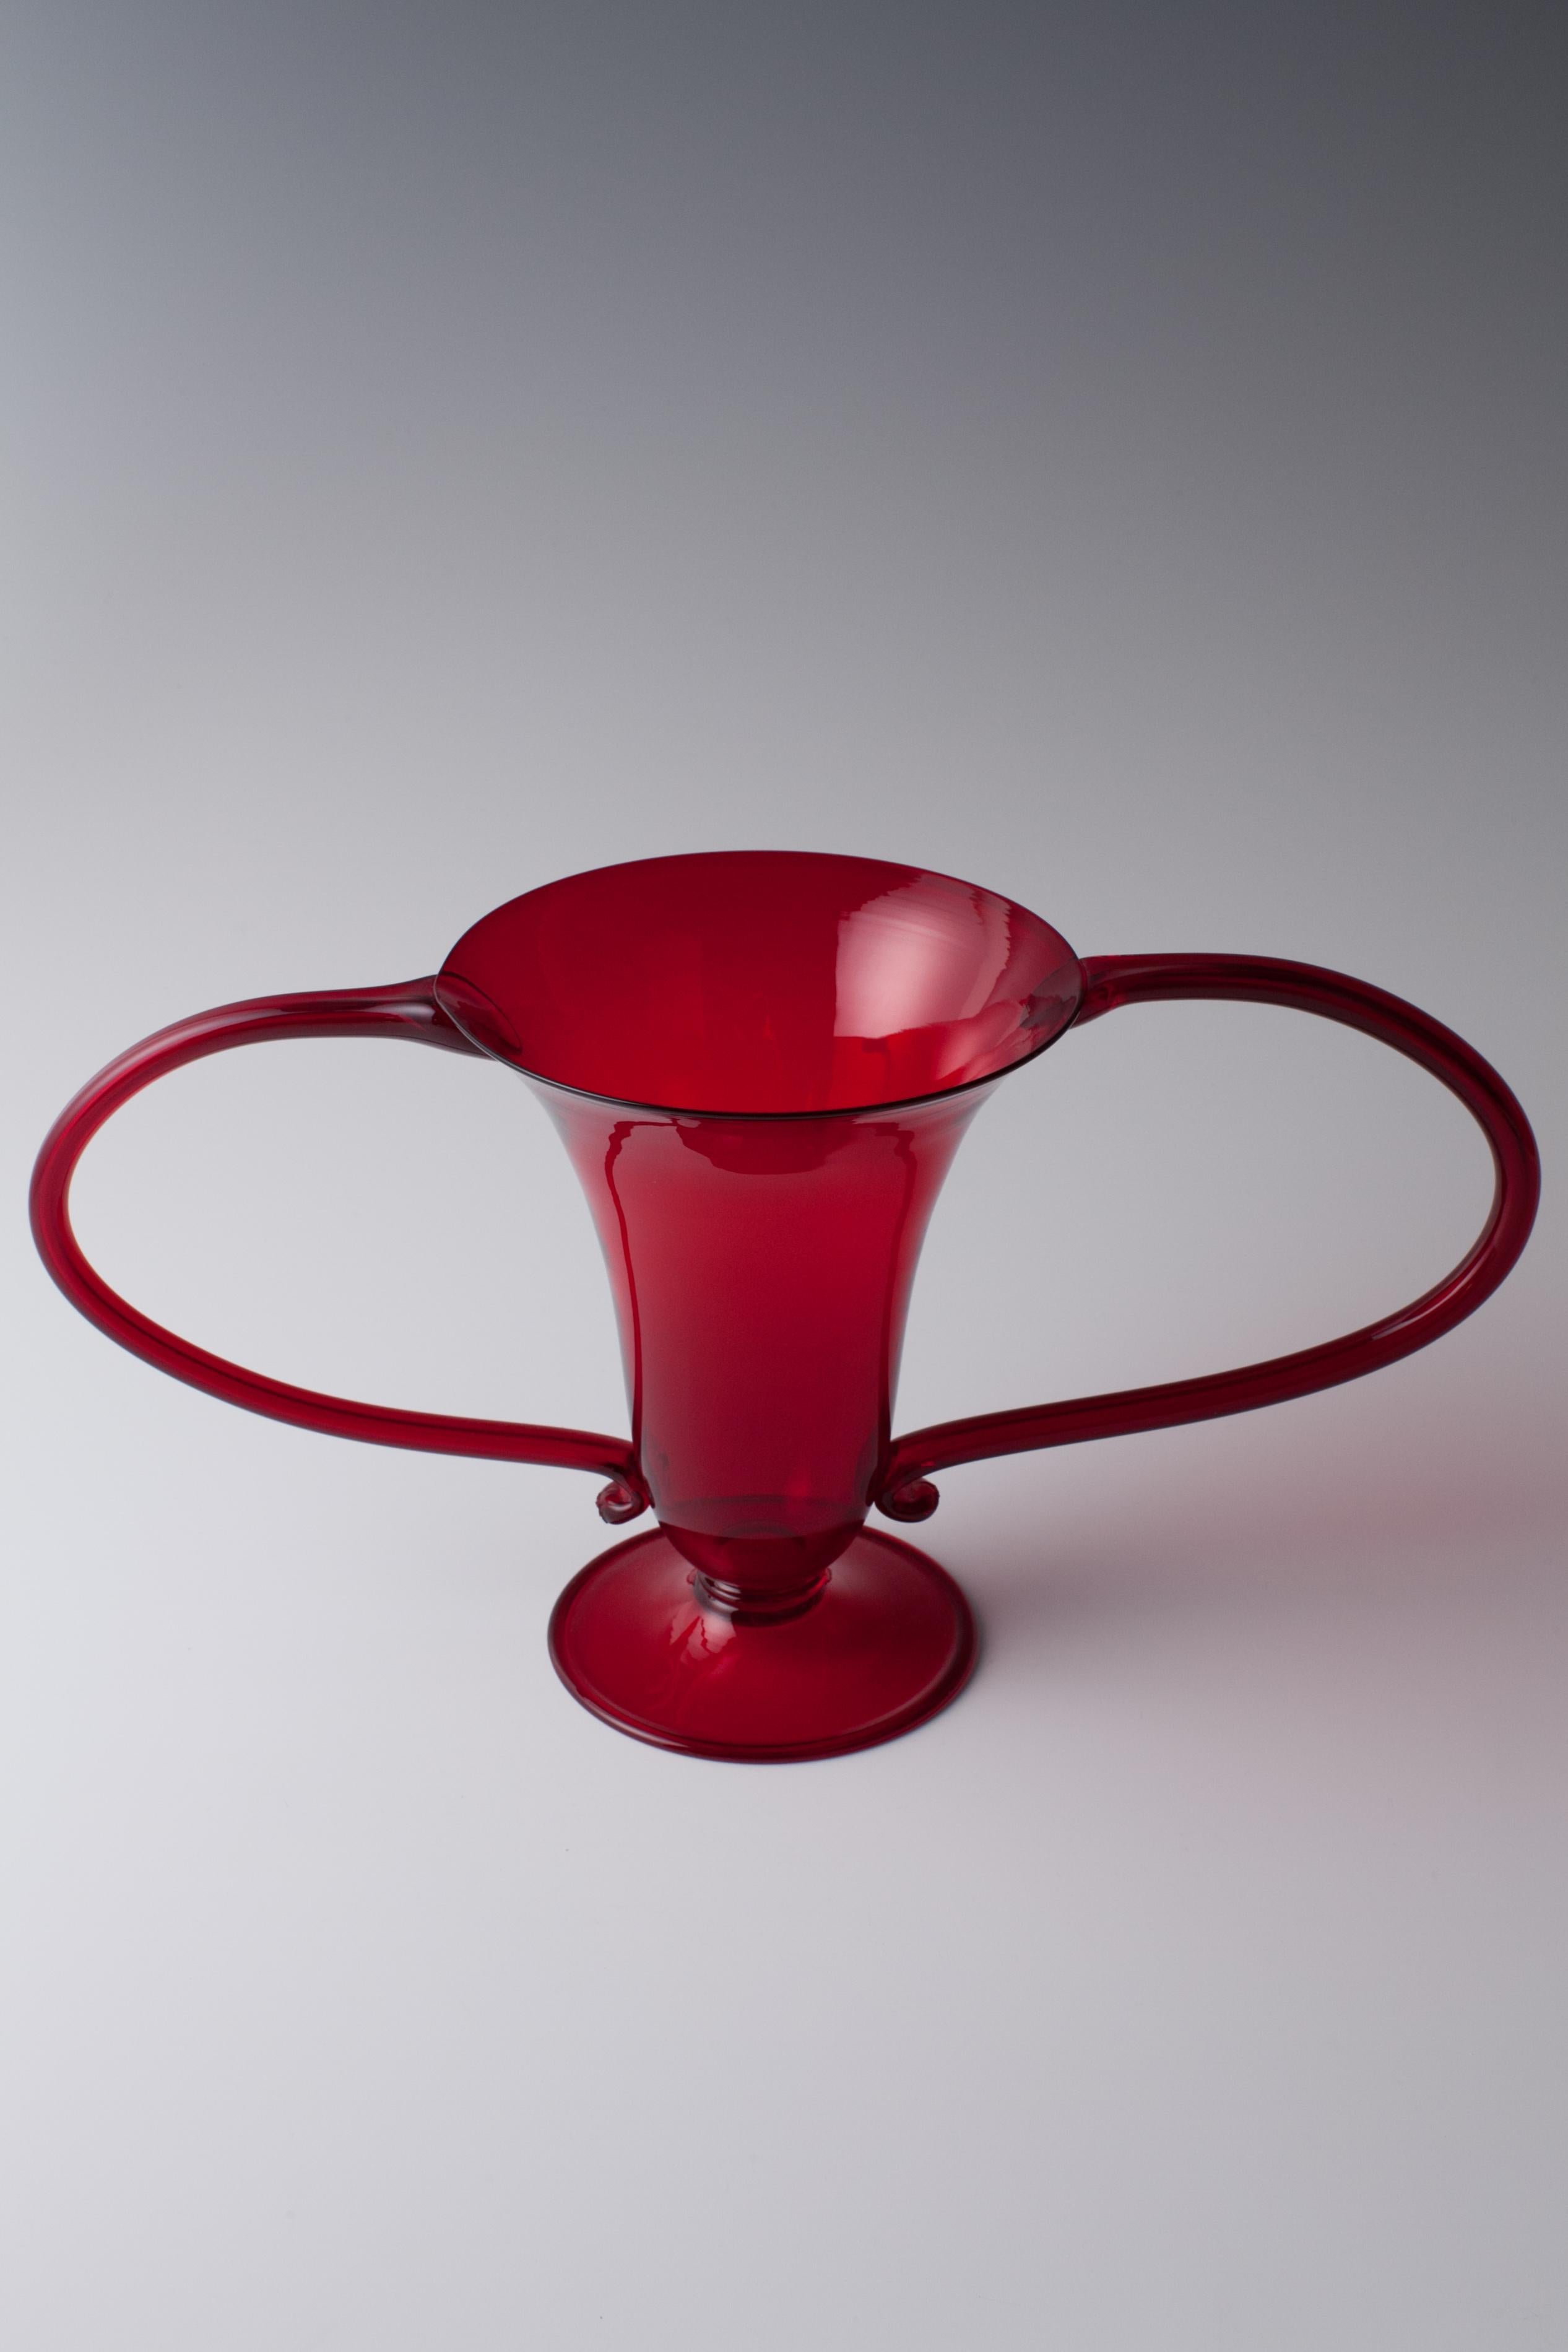 The design is from 1923 by Vittorio Zecchin for Venini

Designed by Vittorio Zecchin for Venini in 1923

Dark-red glass made by hand and mouth blown.

Signed / Marked: No.